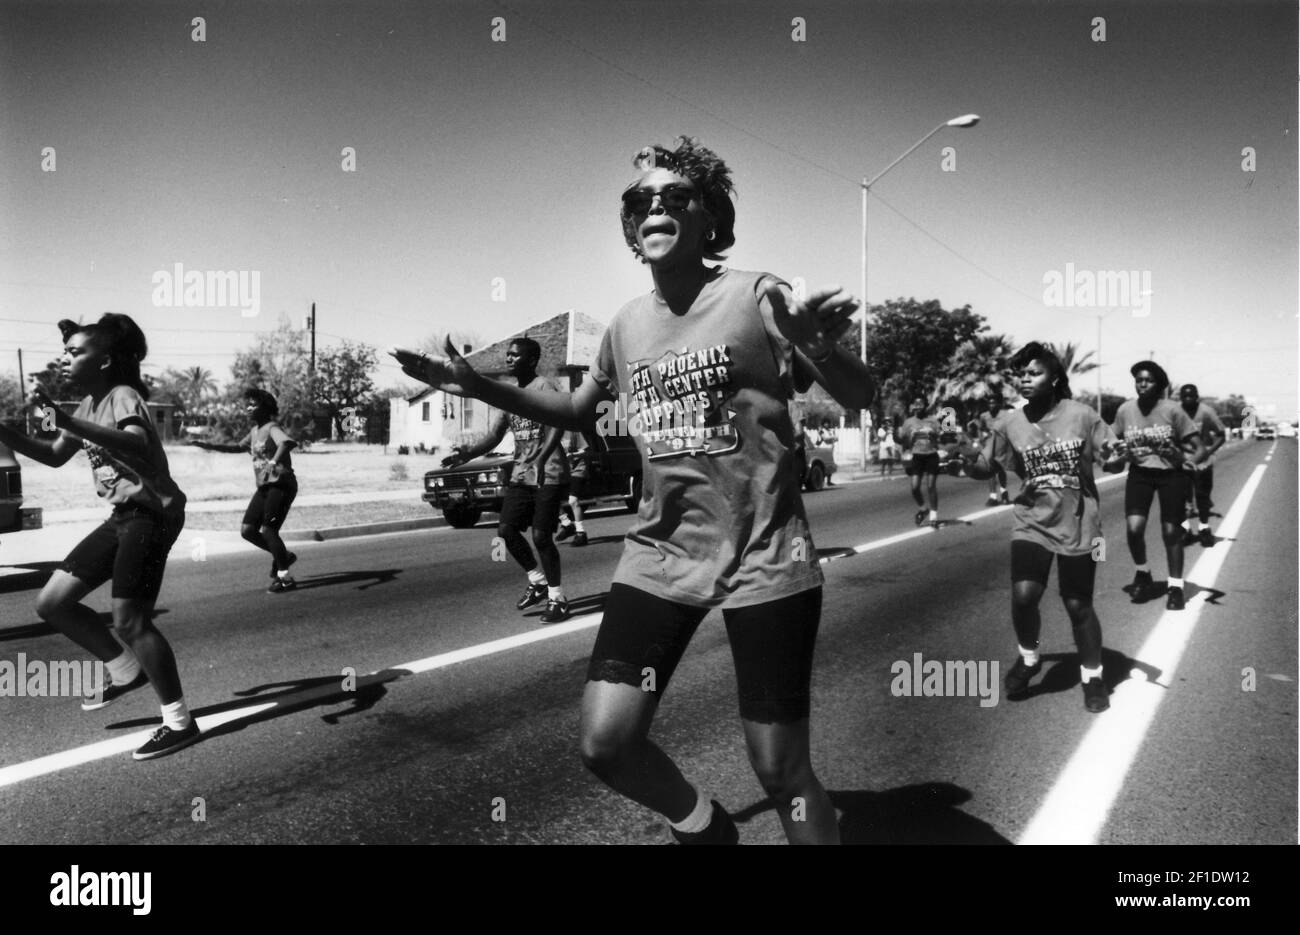 1991: Juneteenth Parade, Sherilyn Dean (foreground) leads the So. Mountain Touth Center Drill Team. Juneteenth is celebrated as a commemoration of the ending of slavery in the United States. On June 19, 1865 Union soldiers, led by Major General Gordon Granger, arrived in Galveston, TX to spread the news that the war had ended and that the enslaved were now free. The announcement came two year after President Abraham Lincoln’s Emancipation Proclamation given on January 1, 1983, which was not enforced in Texas due to a lack of Union Troops in the area. (Photo by Suzanne Starr/The Republic/USA To Stock Photo